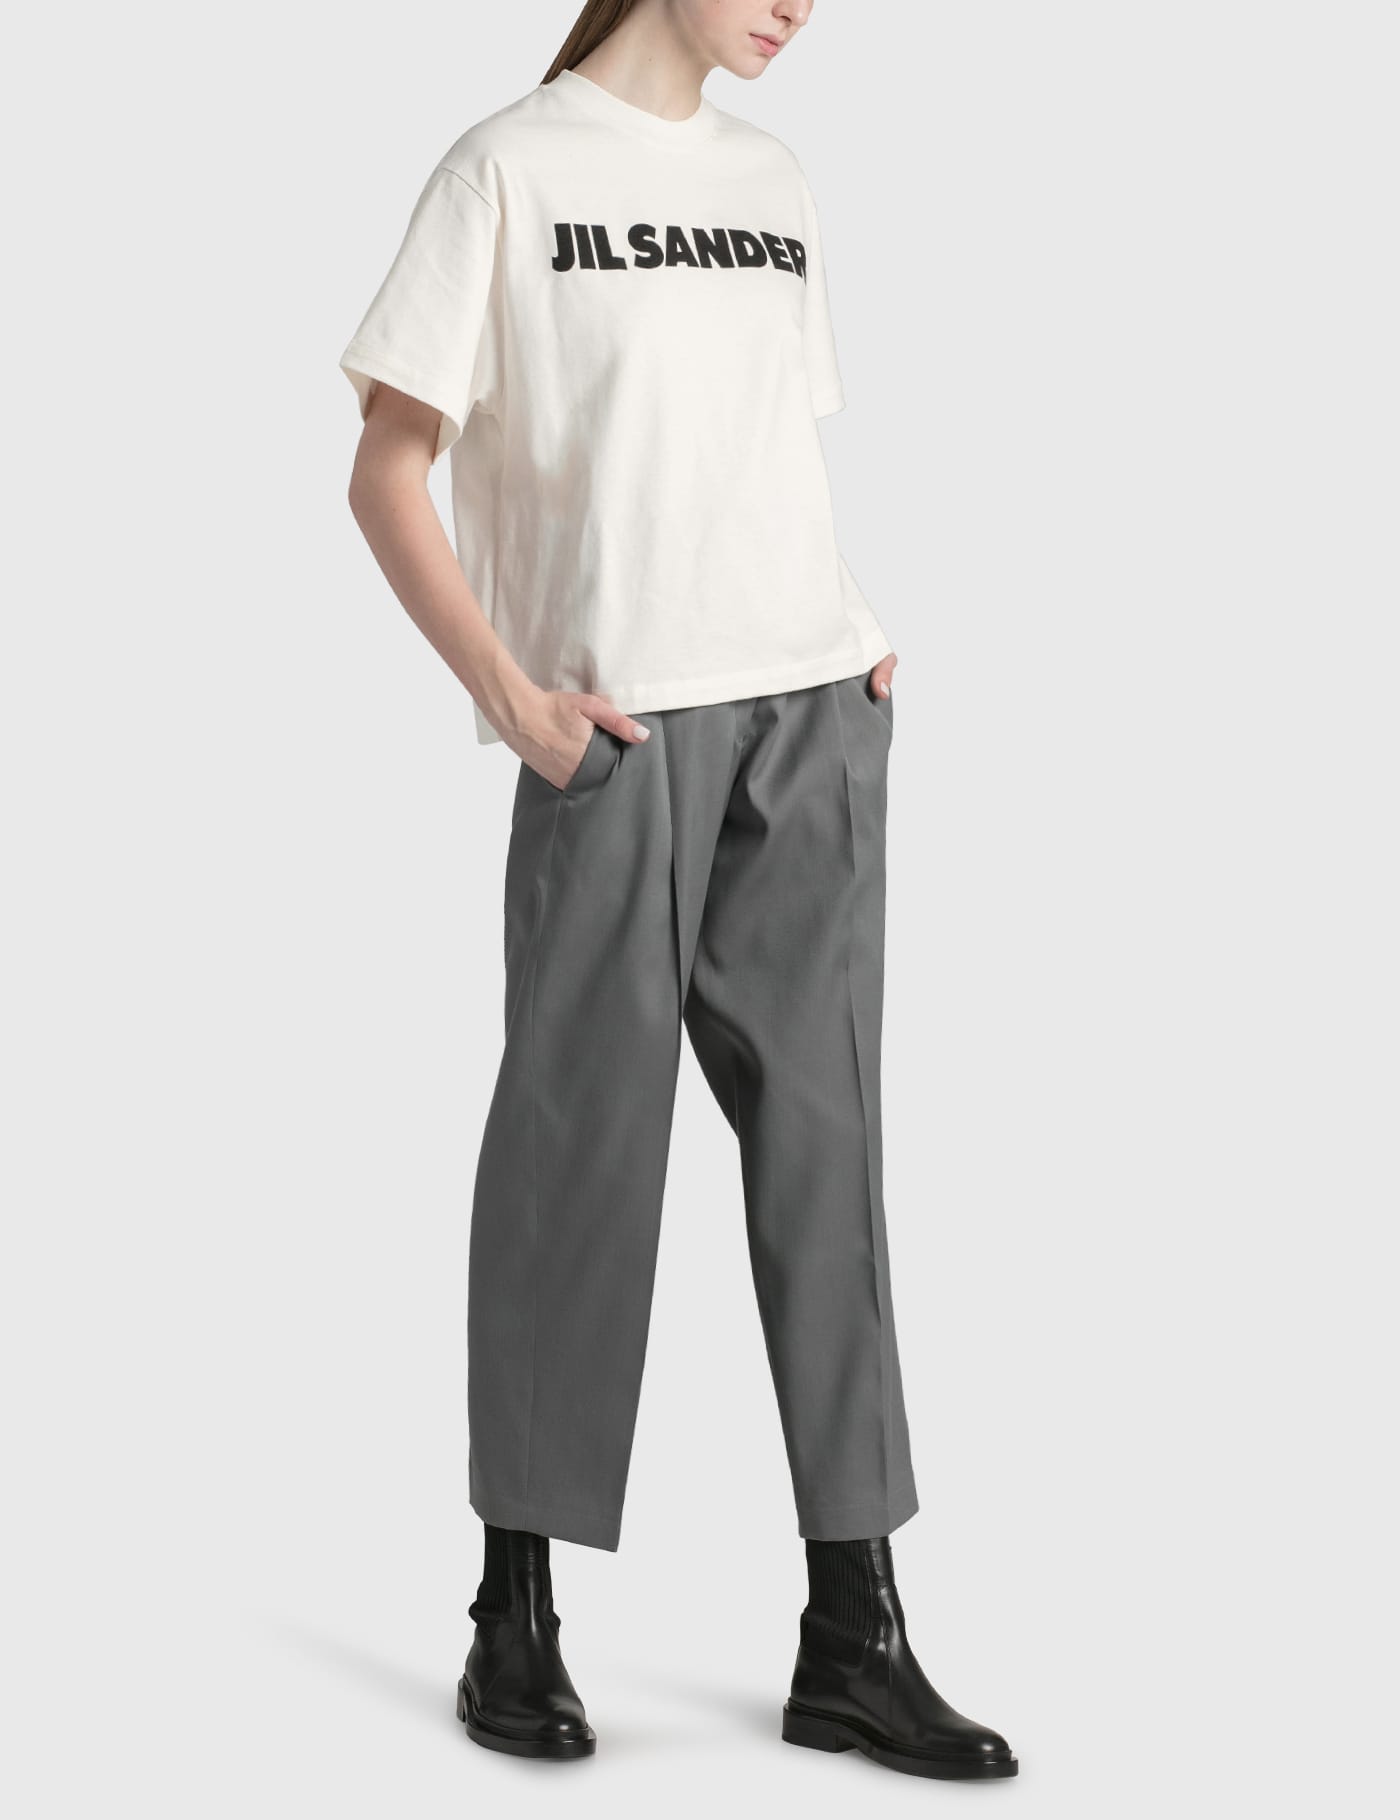 Jil Sander | HBX - Globally Curated Fashion and Lifestyle by 